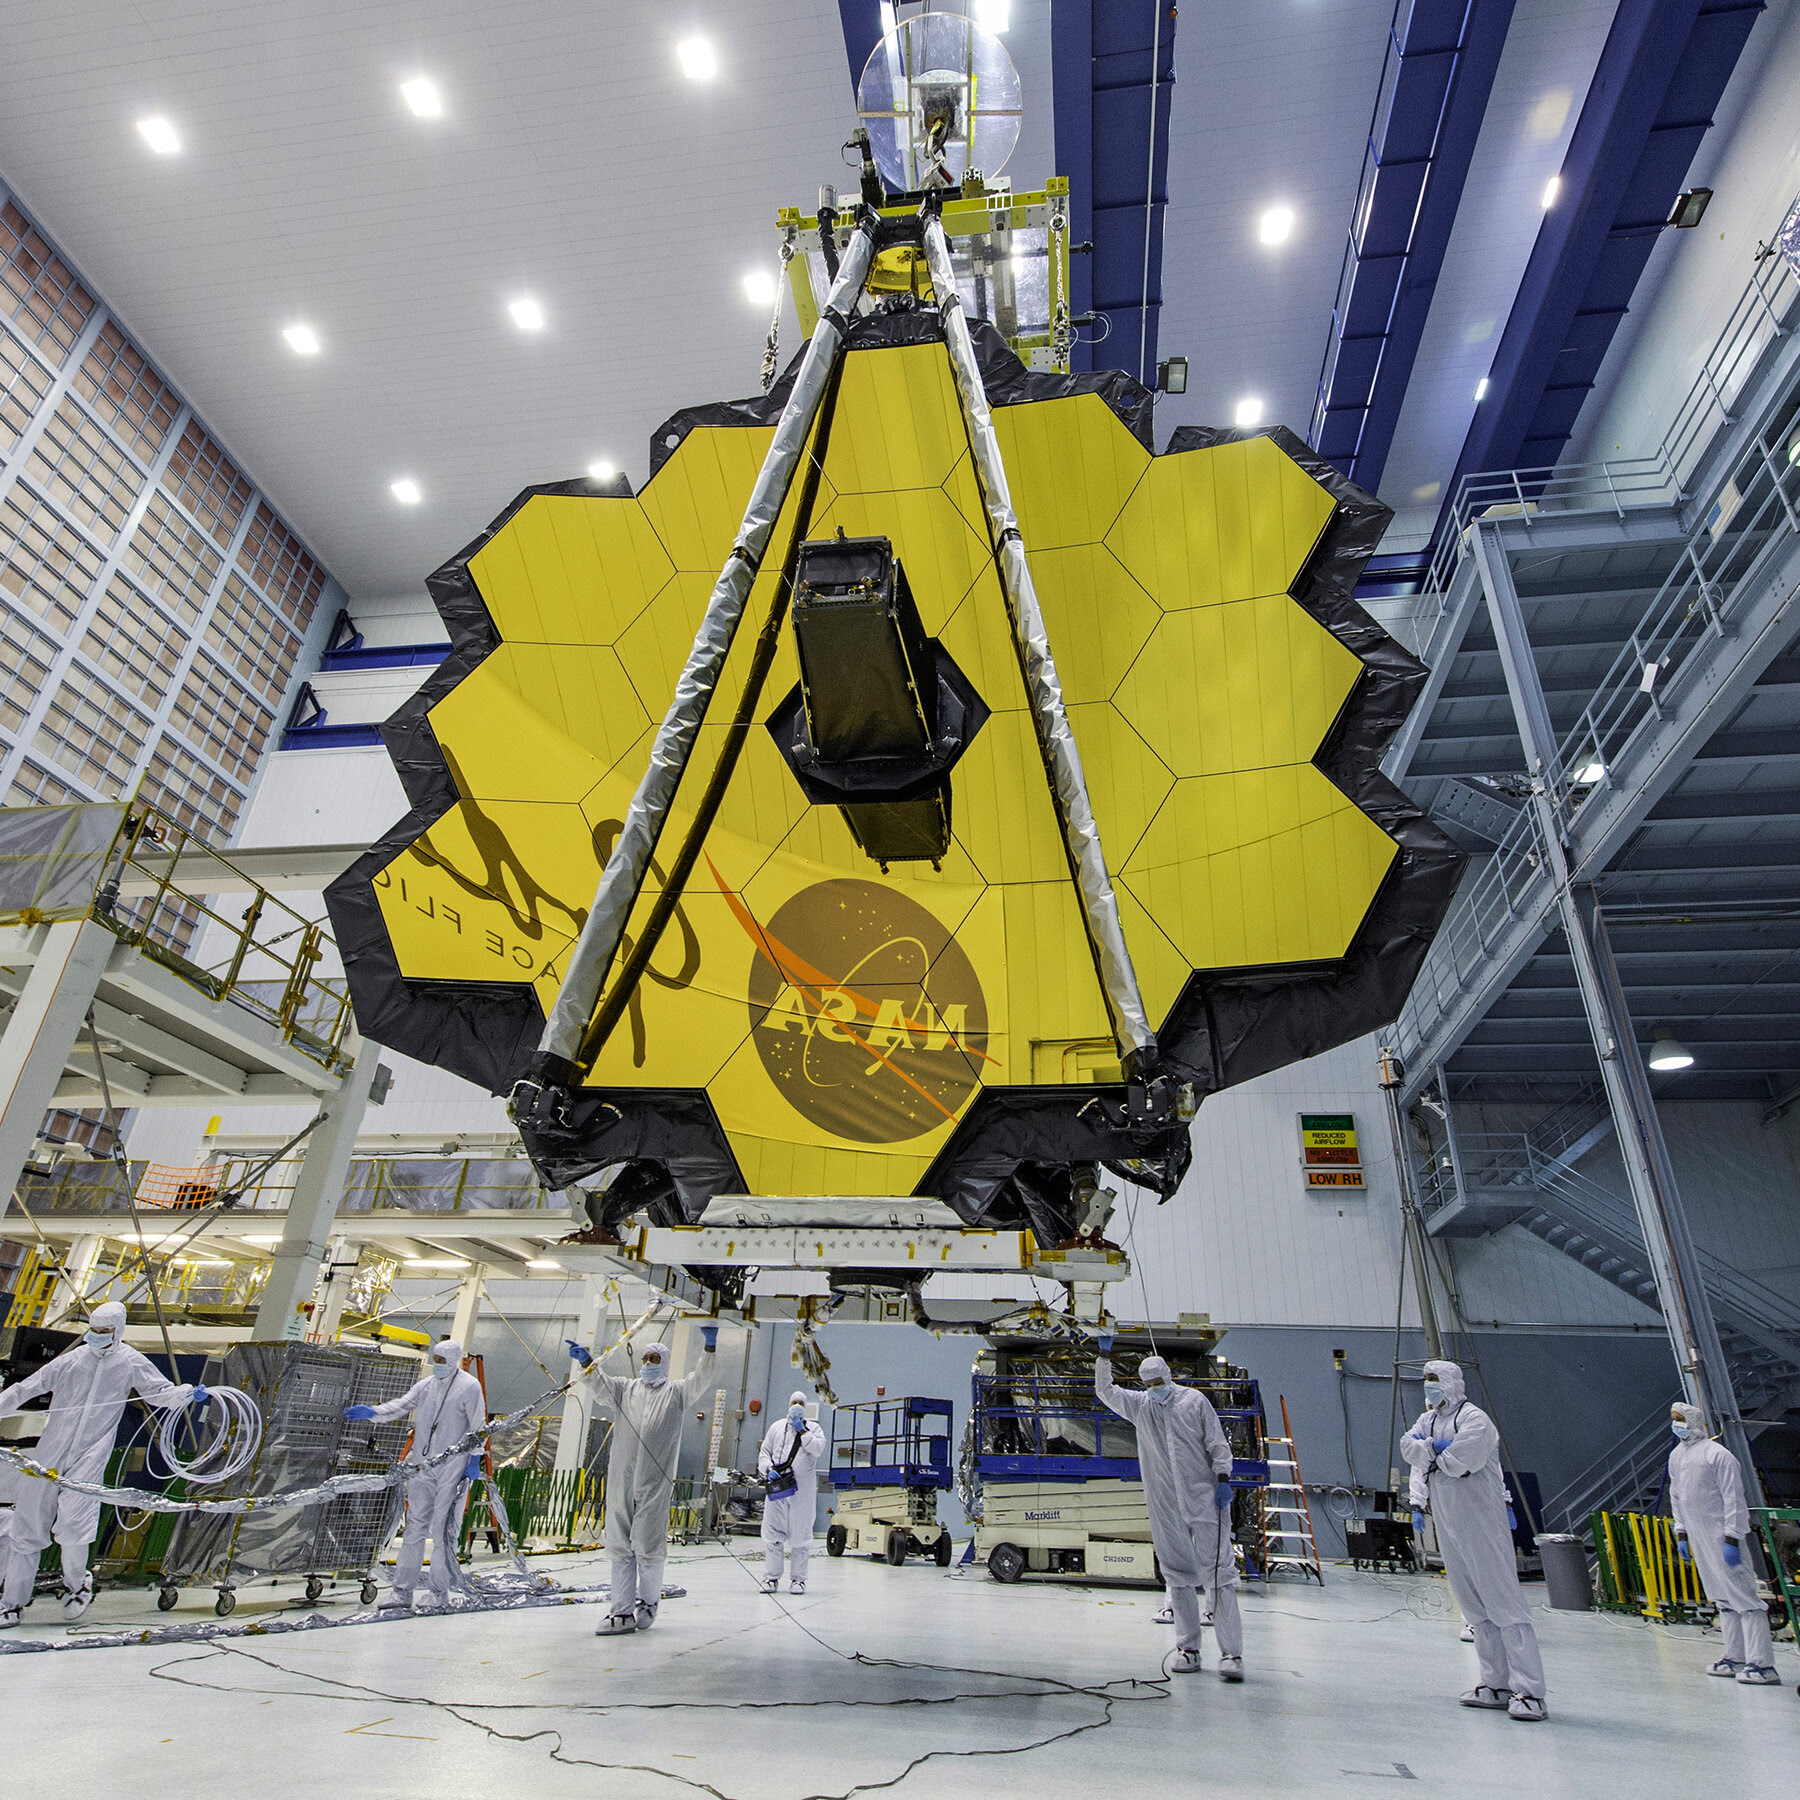 NASA Delays James Webb Telescope Launch Date, Again - The New York Times